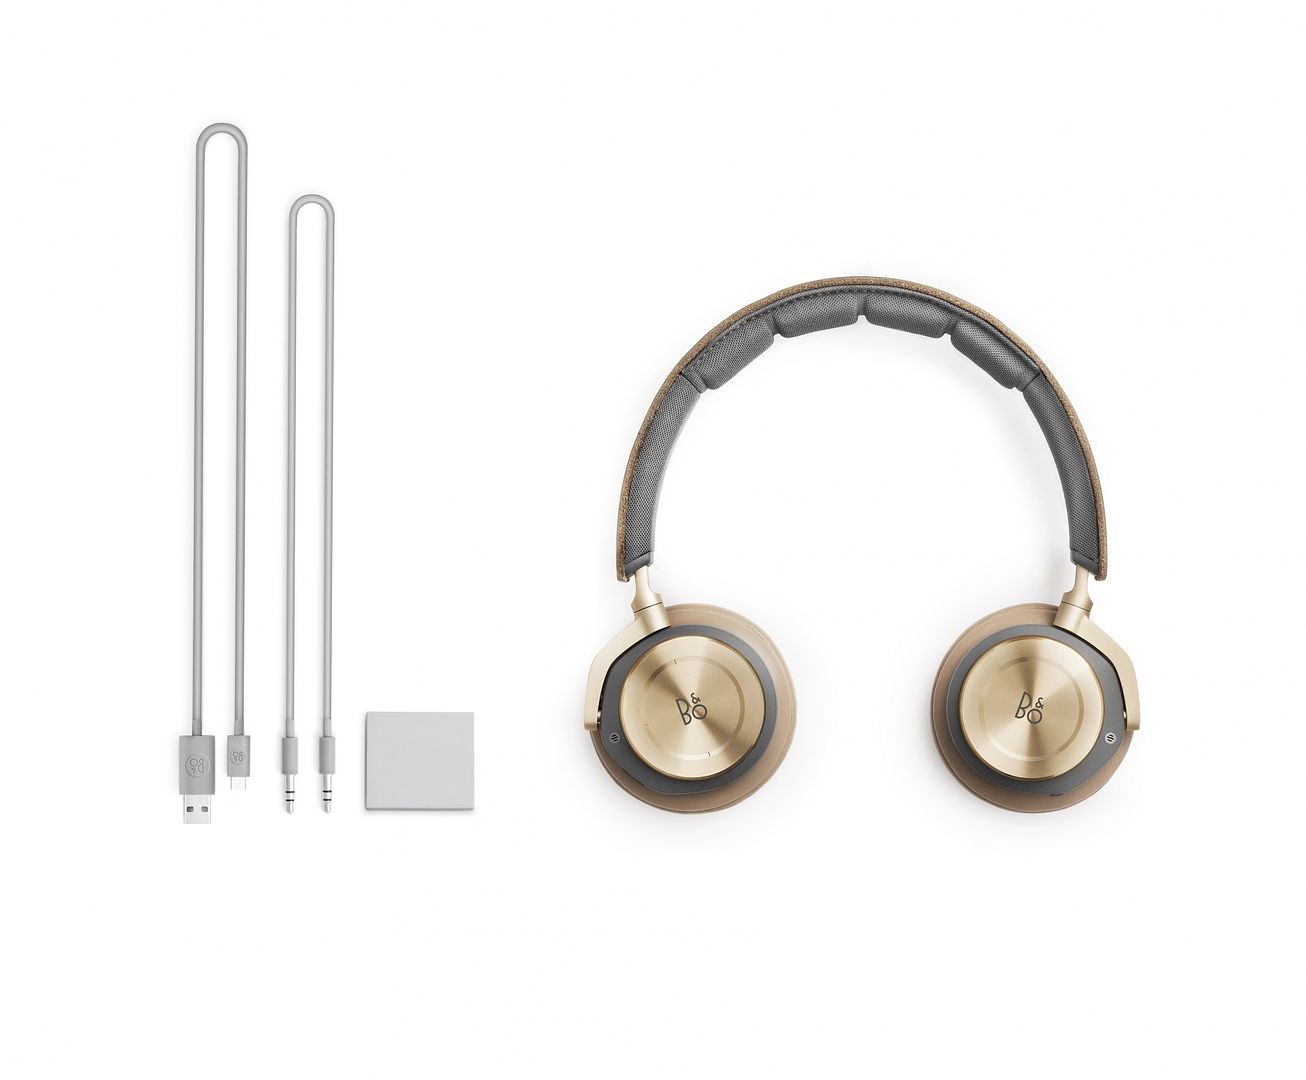 The new Beoplay H8 Bluetooth headphones from Bang & Olufsen: Noise cancelling like we've never heard before